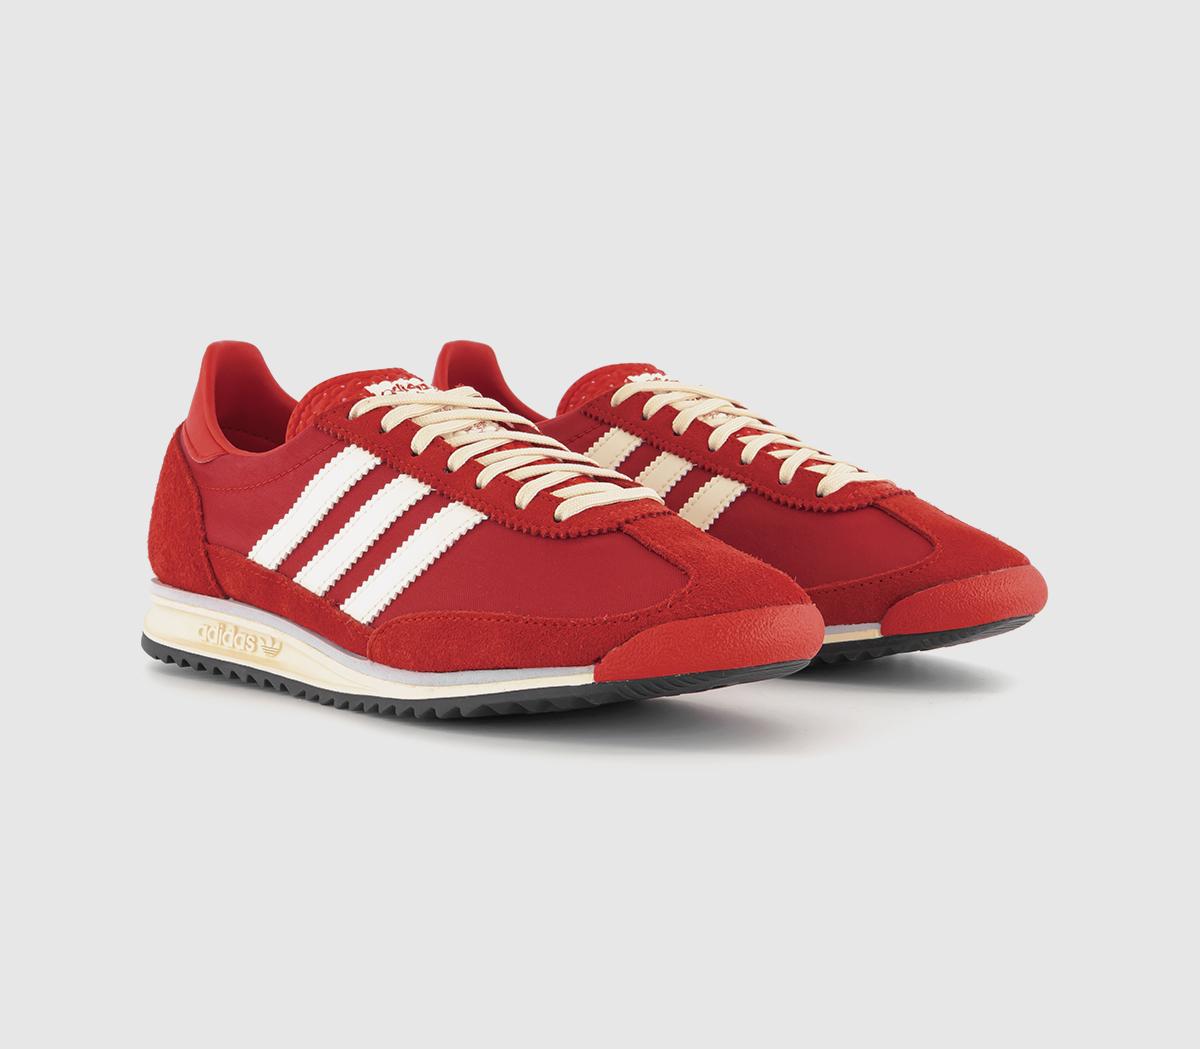 Adidas SL 72 Trainers Scarlet Red White Black, 6.5